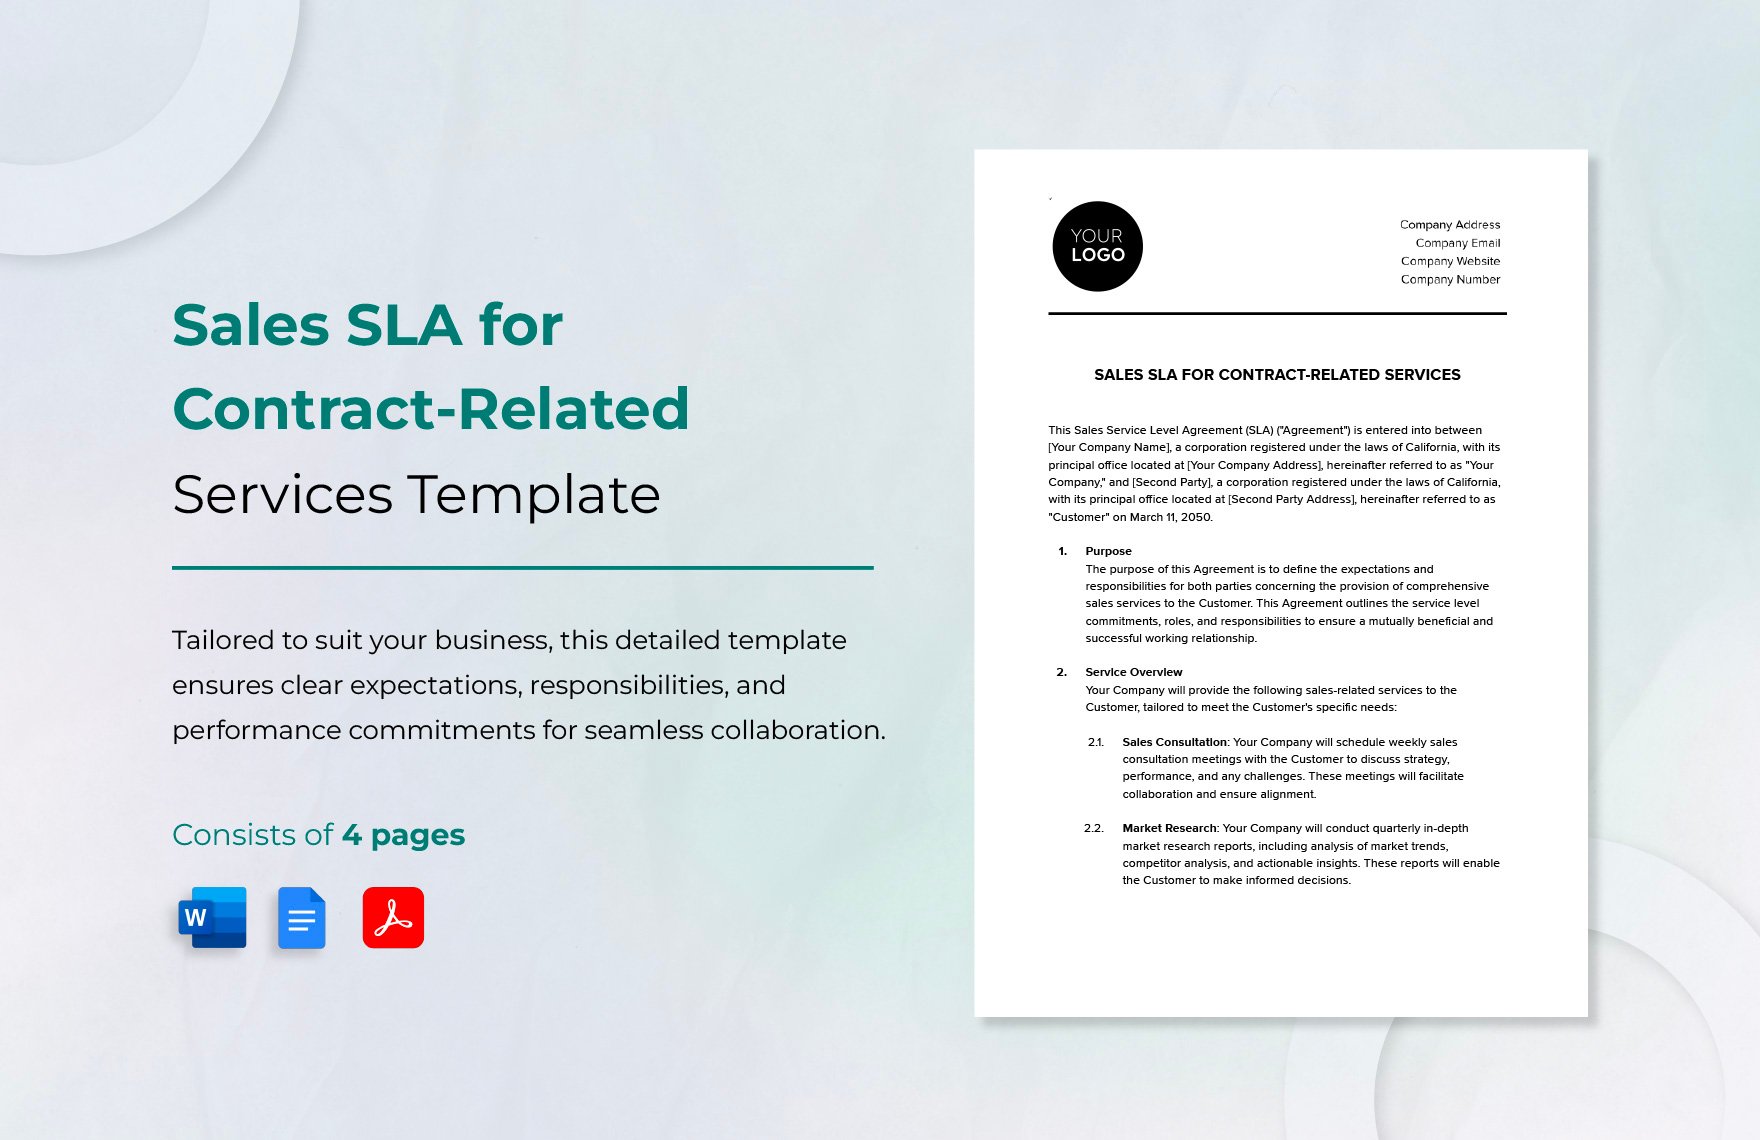 Sales SLA for Contract-Related Services Template